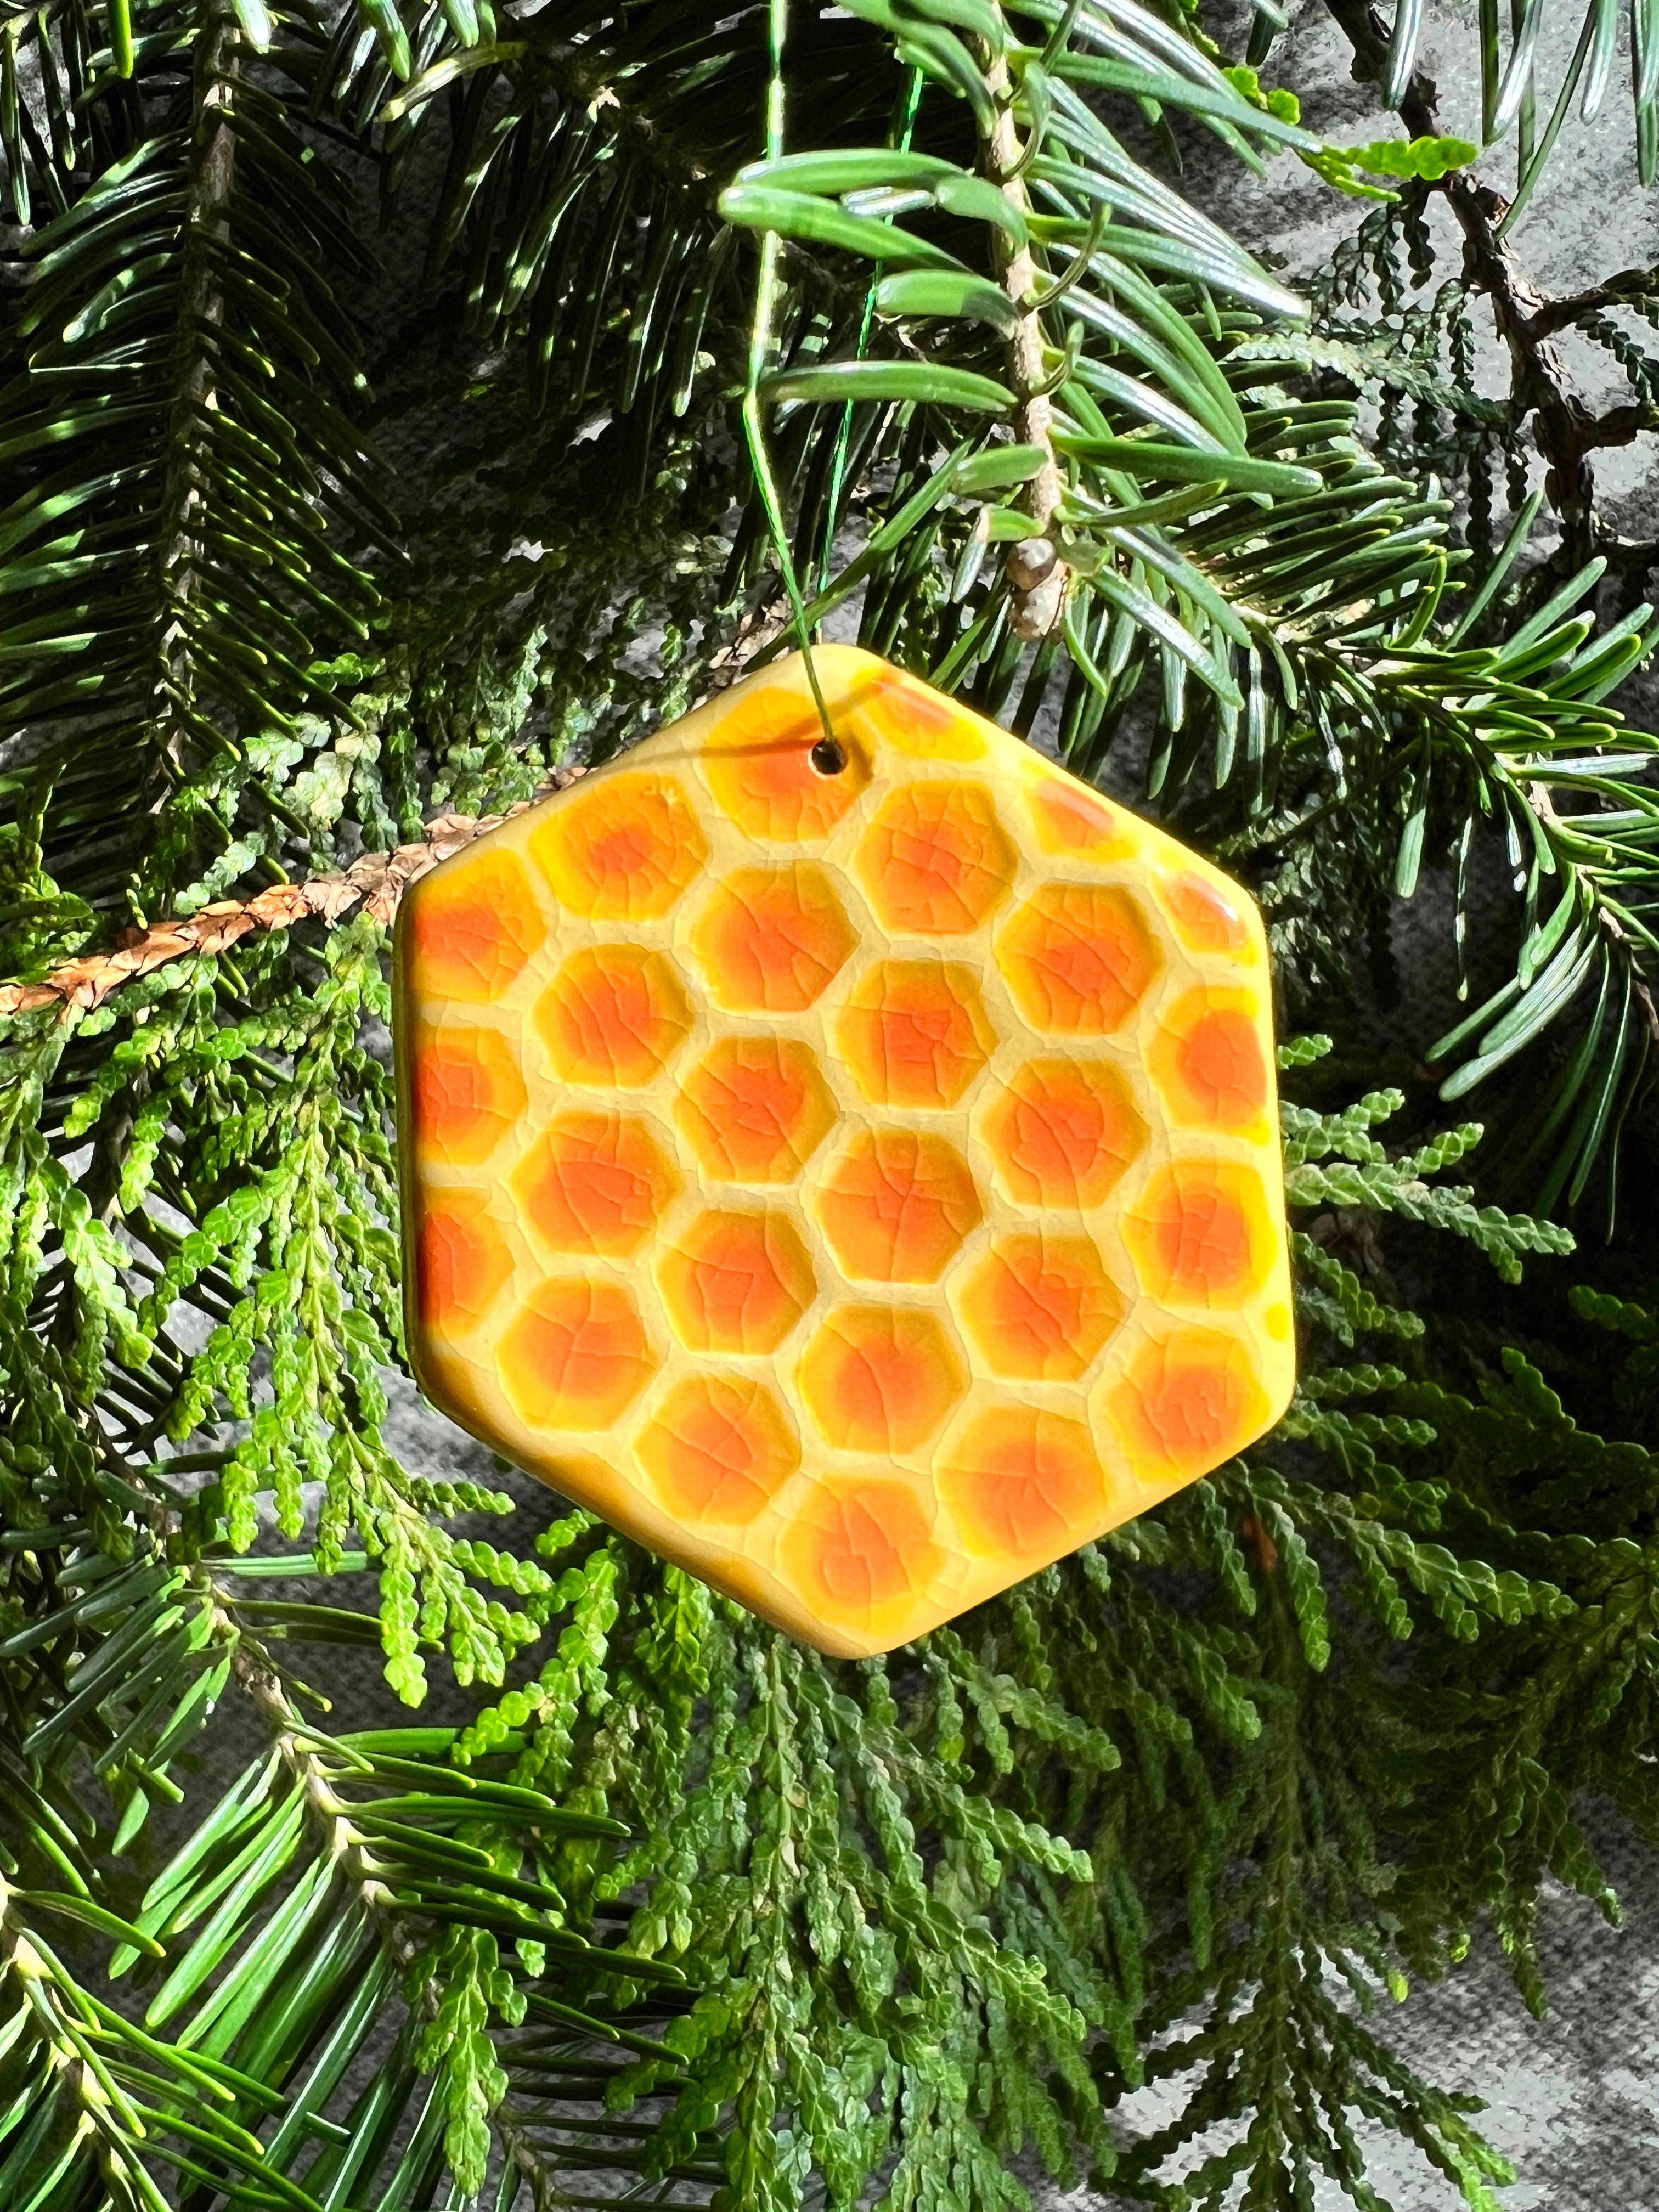 A yellow and orange hexagon with a crackle clear glaze and textured honeycomb surface ornament hangs in front of cedar and balsam branches.